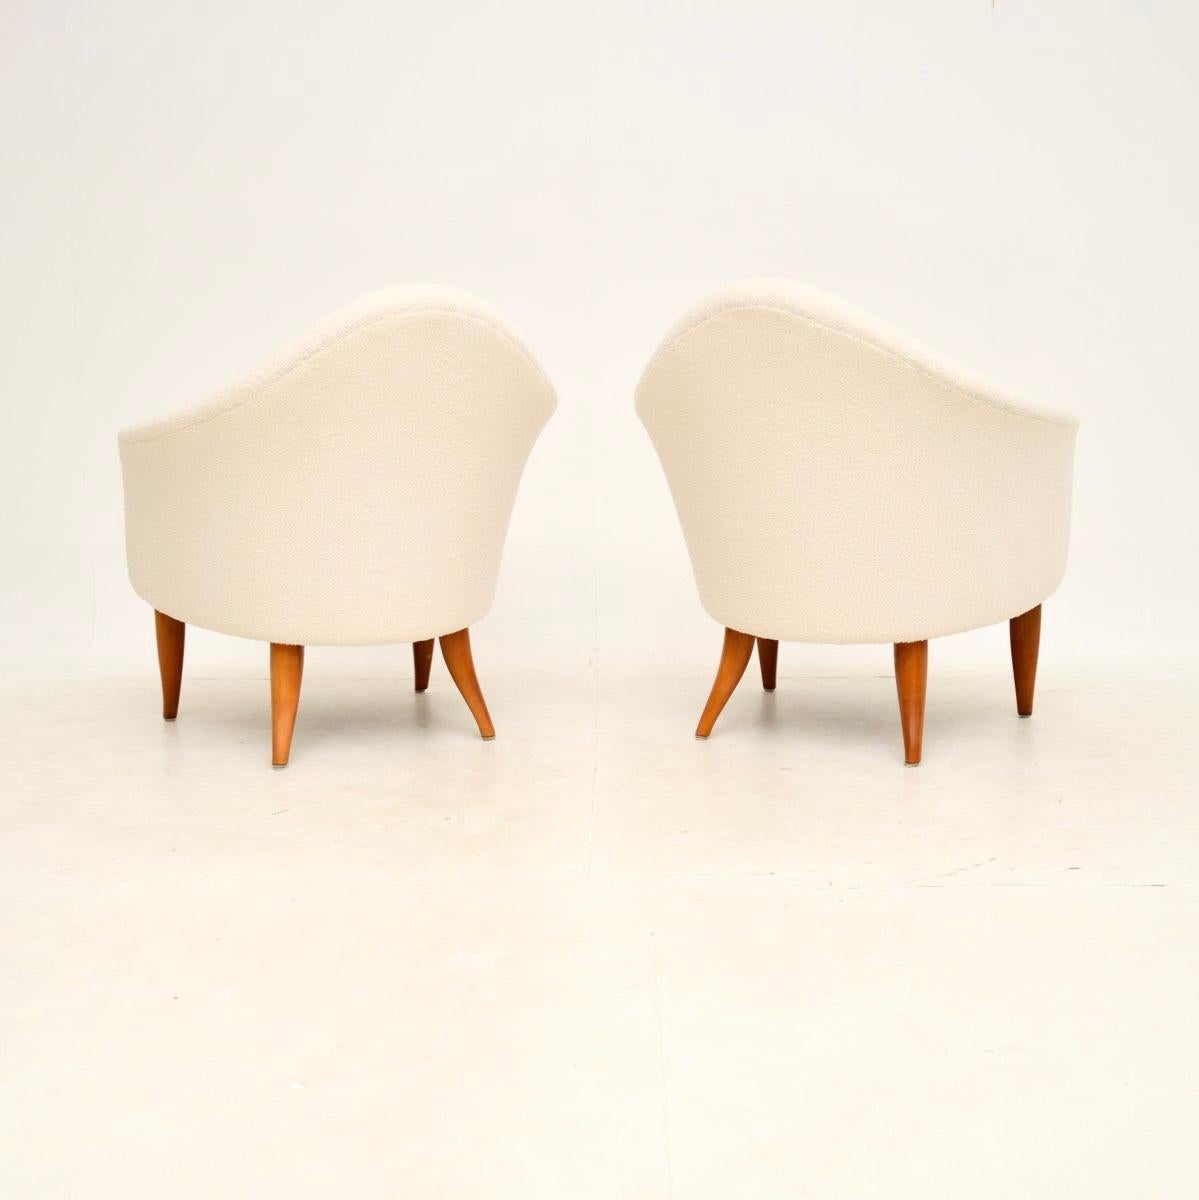 Pair of Vintage Swedish Armchairs by Kerstin Horlin Holmquist In Good Condition For Sale In London, GB